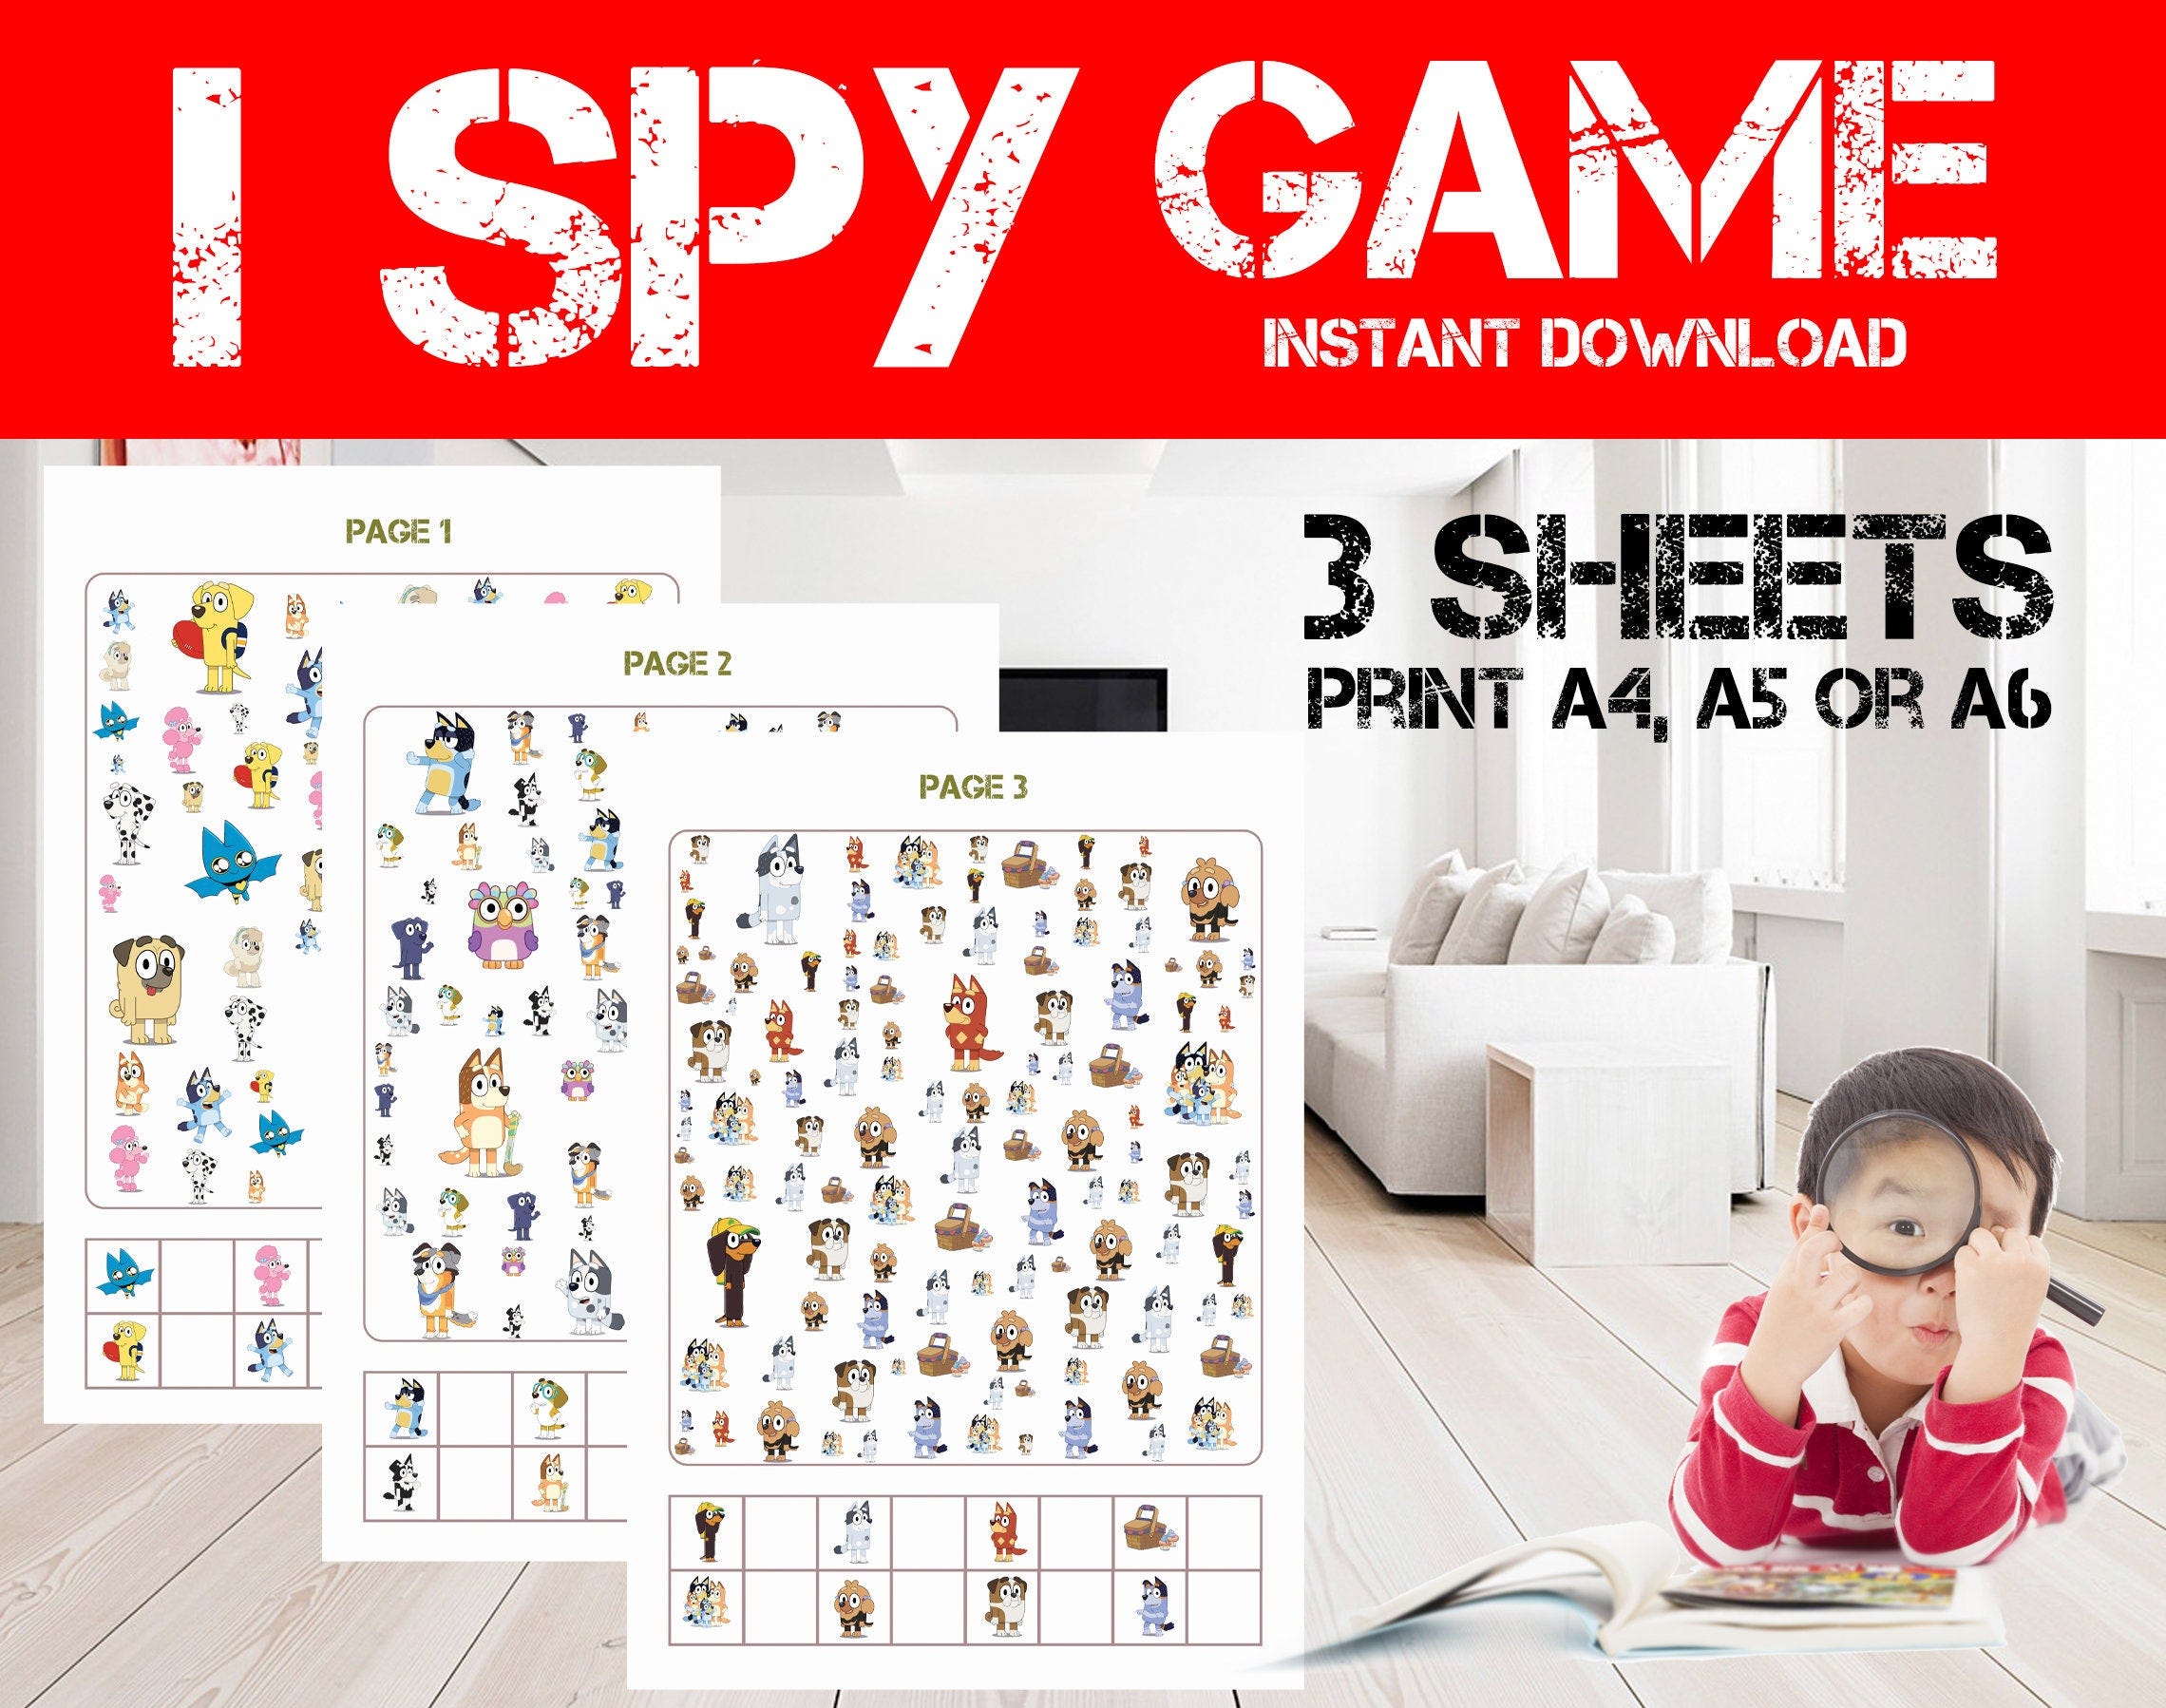 Bluey-Themed I Spy / Look & find game - Printable Blue Dog game - Blue, Bingo I Spy game - Blue The dog Birthday Activity -Bluey-Party favor